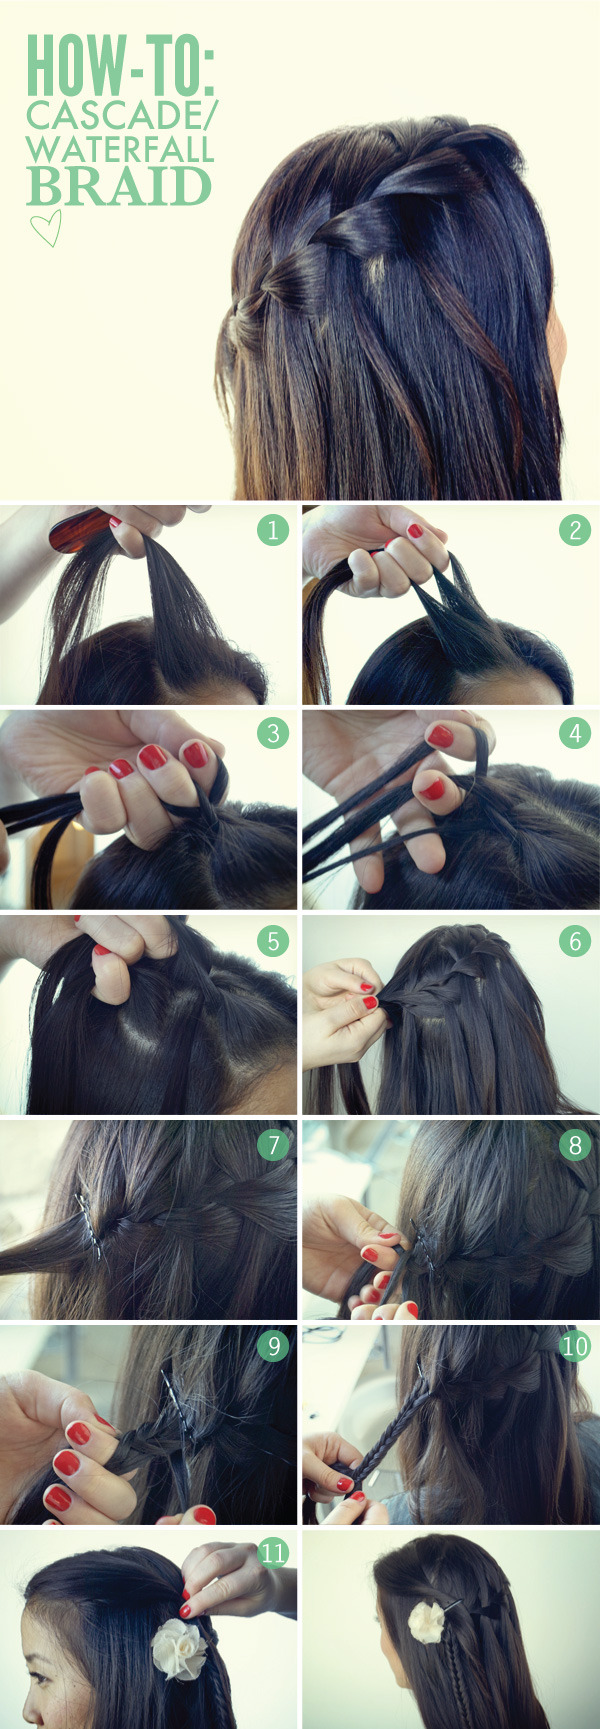 How to do a Waterfall Braid - YouTube